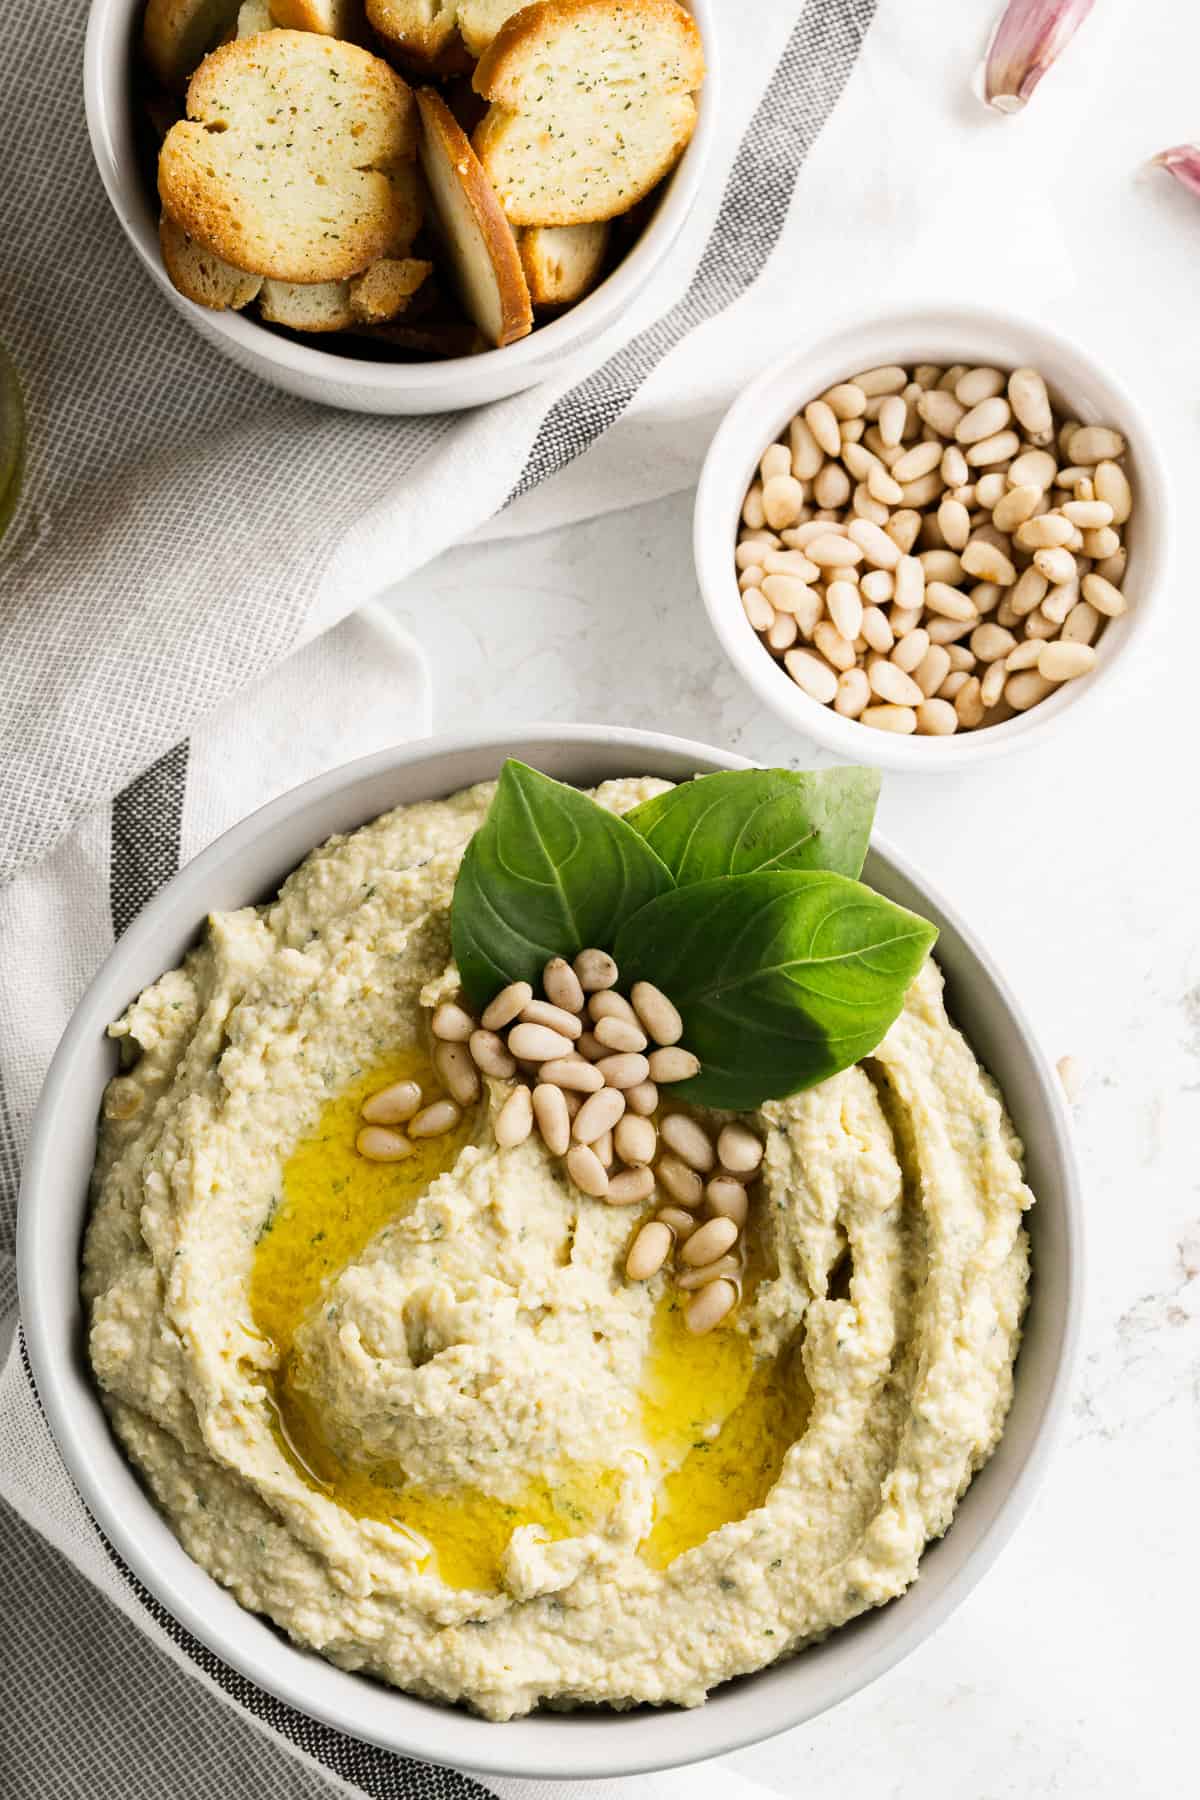 A large bowl of homemade hummus with pesto flavors, pine nuts, and fresh basil leaves on top.